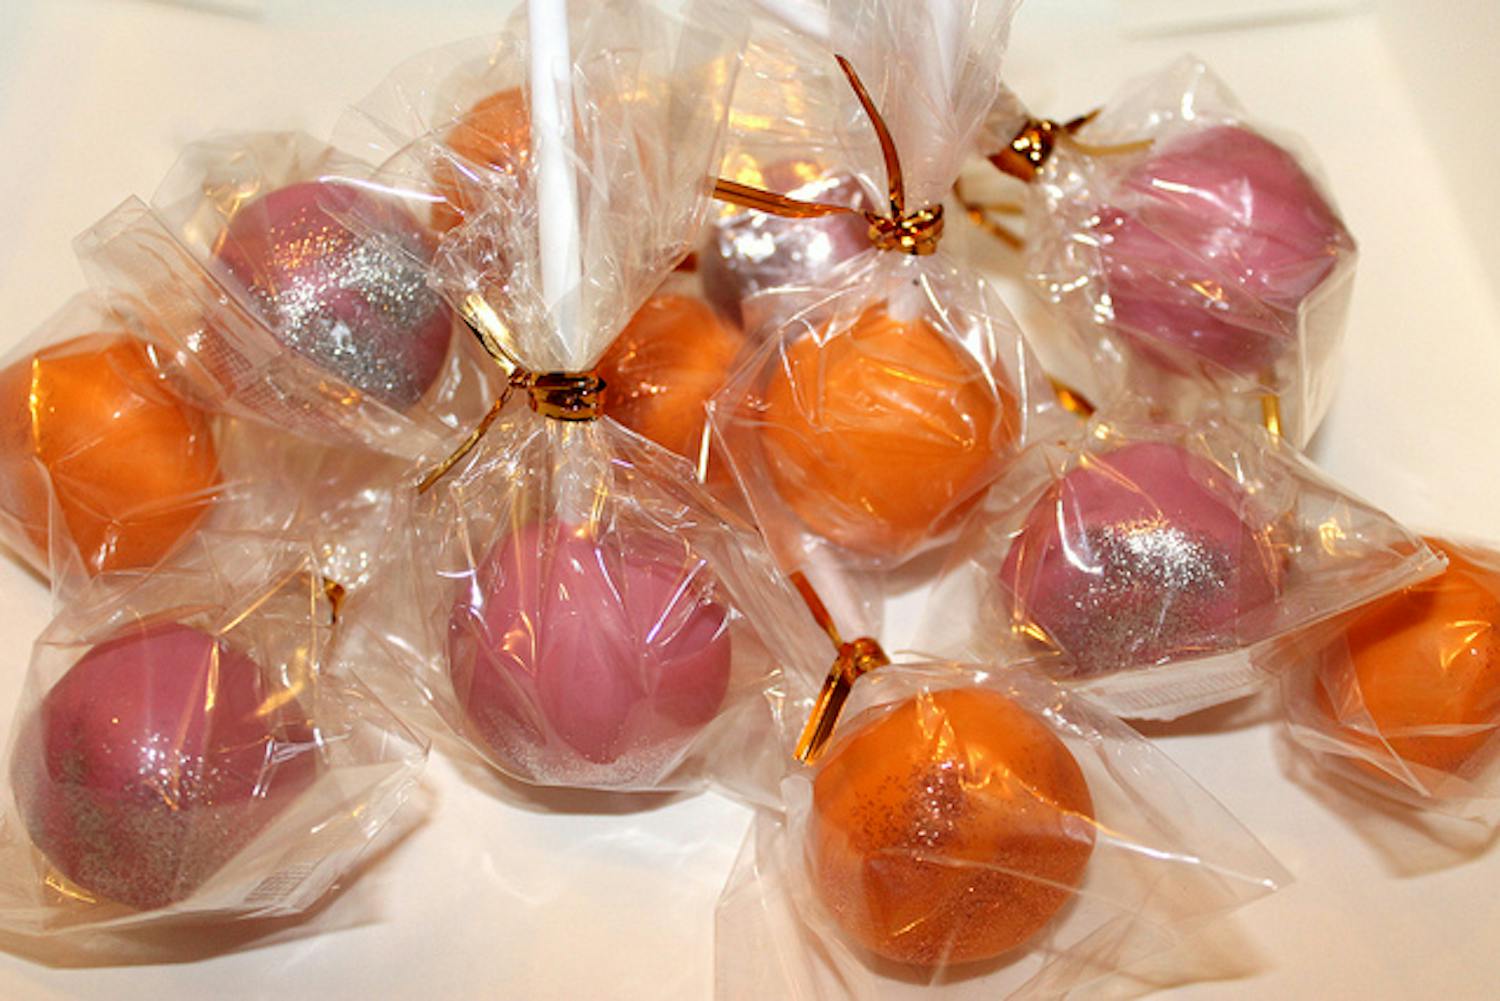 "Cake pops for Tola's birthday 23 Feb '12" by Ayca Wilson, used under CC BY 2.0